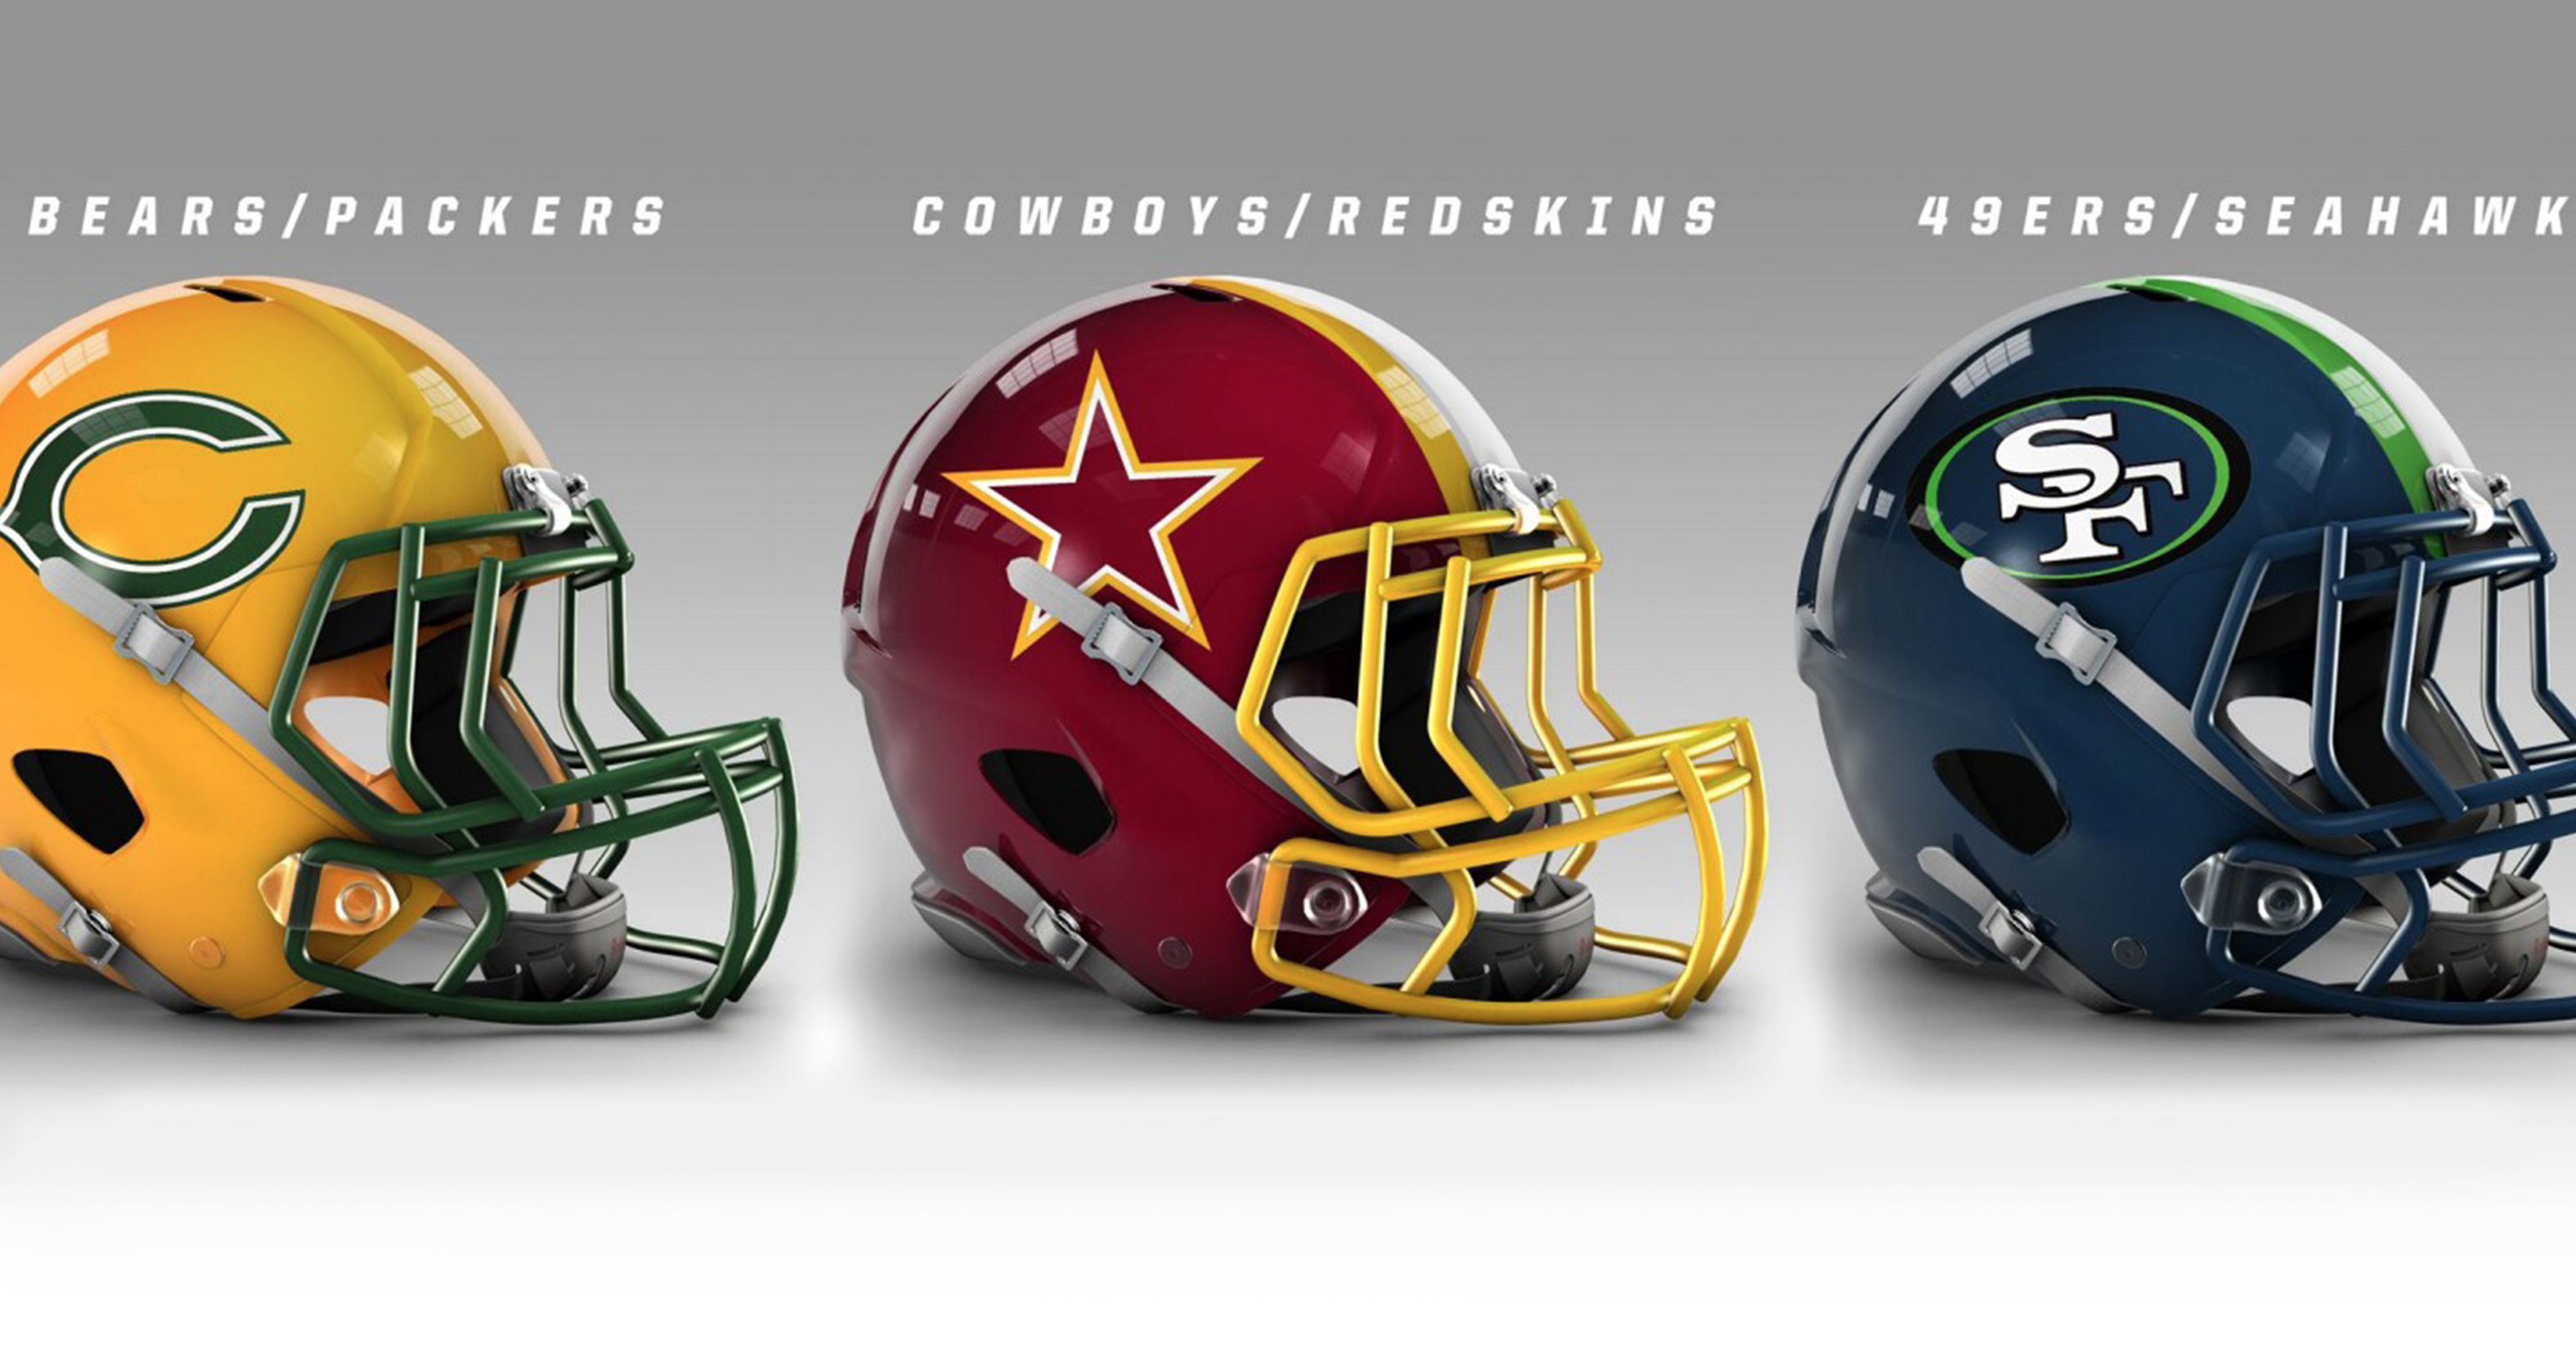 Helmets For Every NFL Team In Their Biggest Rival’s Colors - Daily Snark3150 x 1652